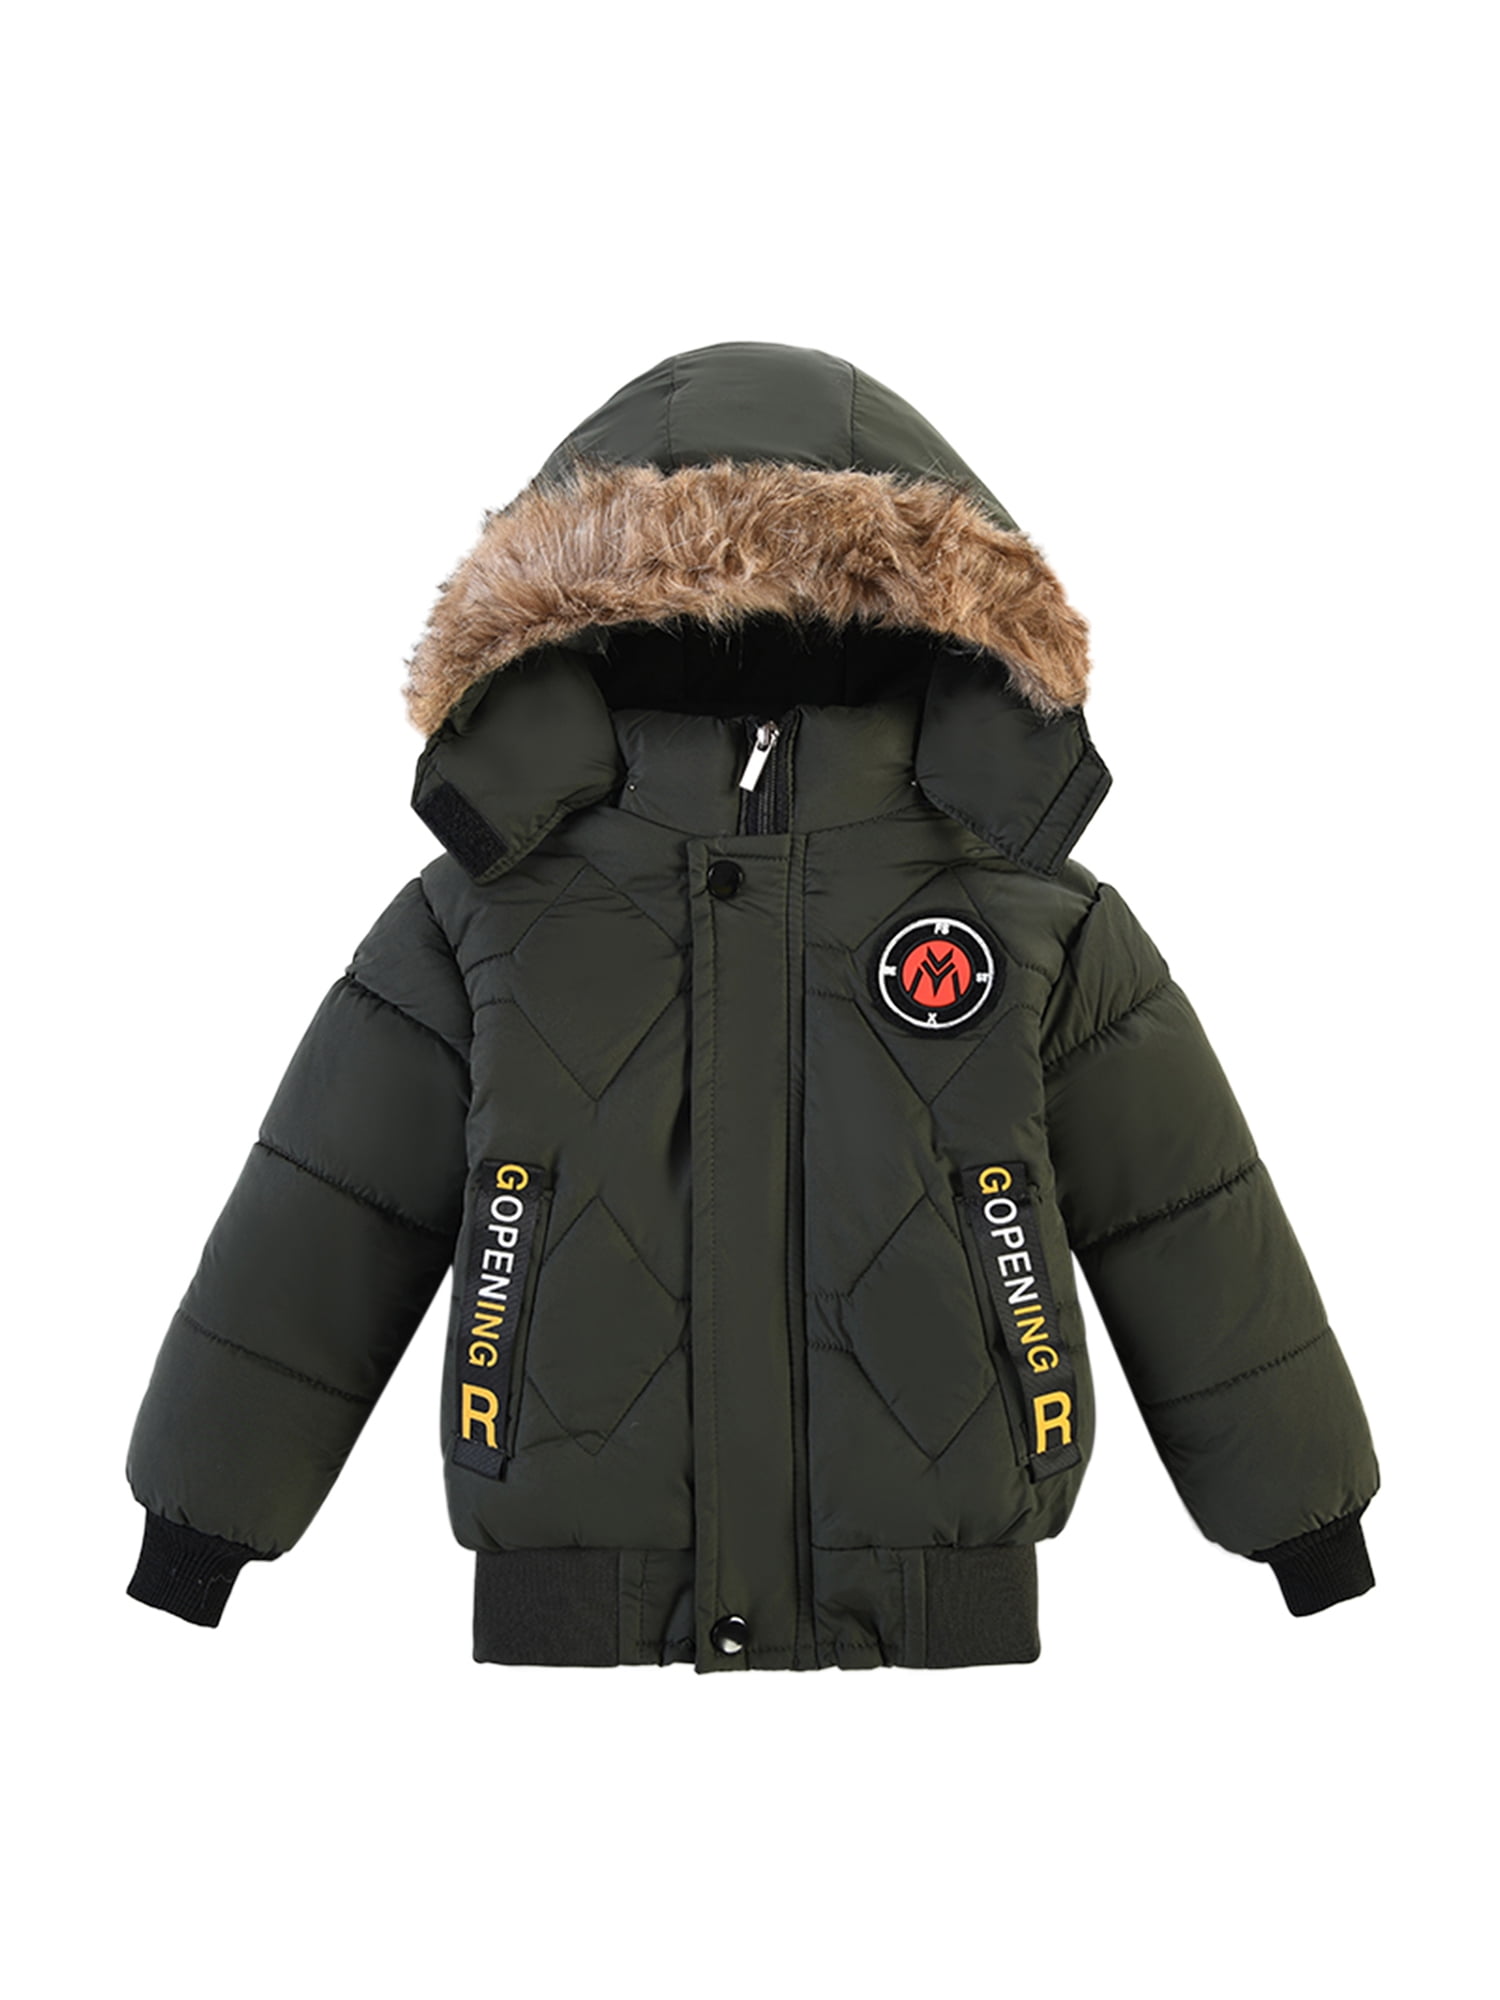 Liangchengmei Toddler Boys Down Jacket Winter Jacket Hooded Thickened ...